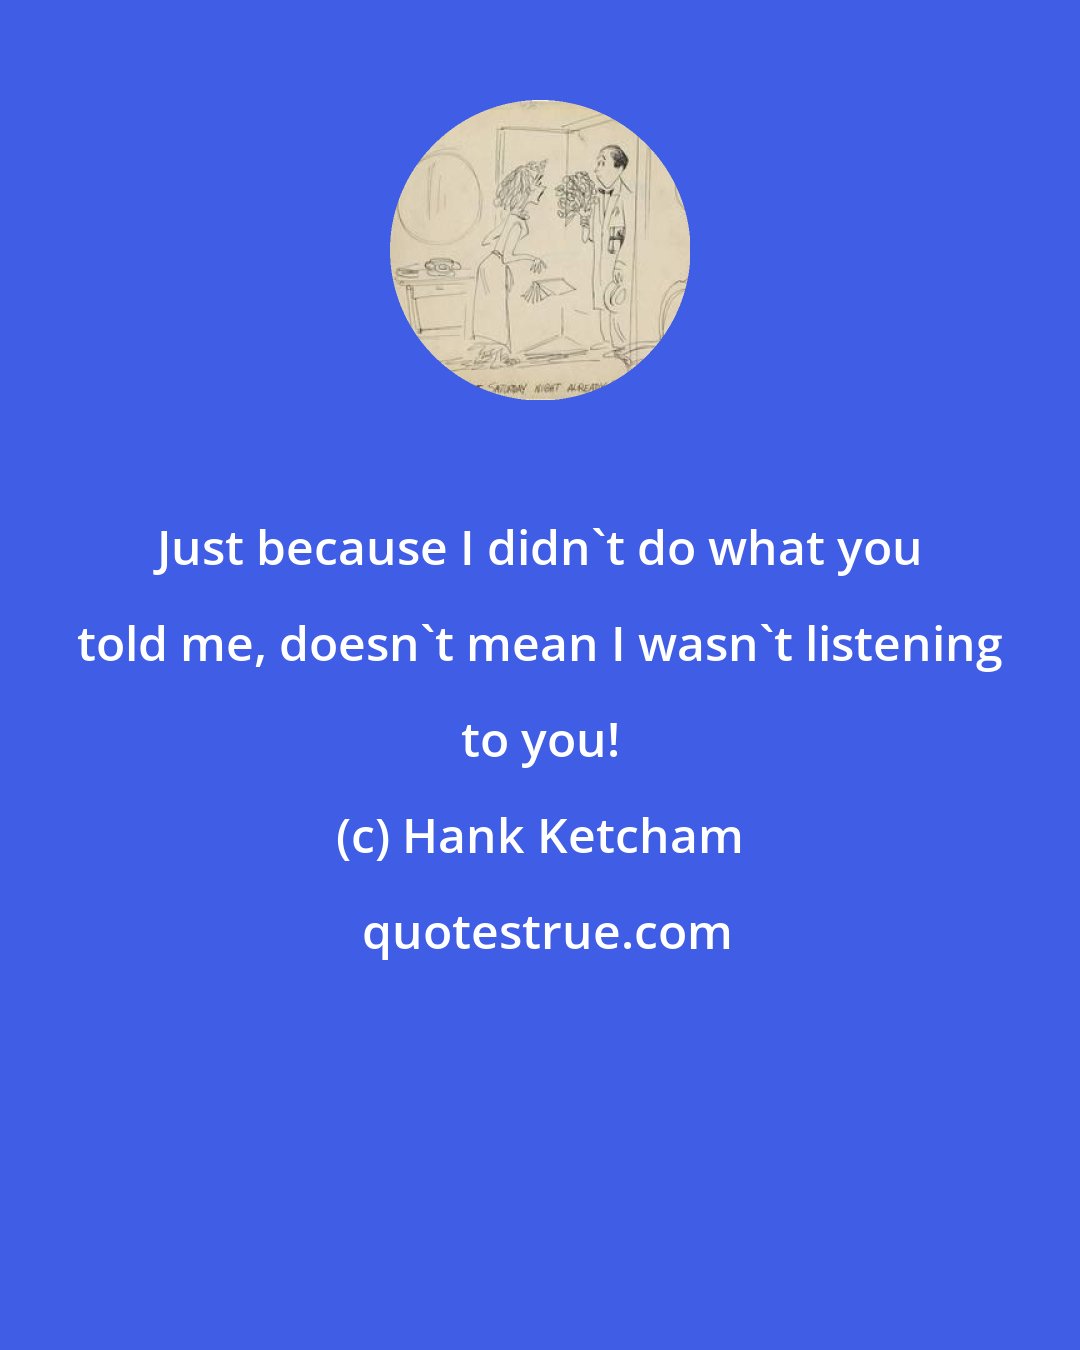 Hank Ketcham: Just because I didn't do what you told me, doesn't mean I wasn't listening to you!